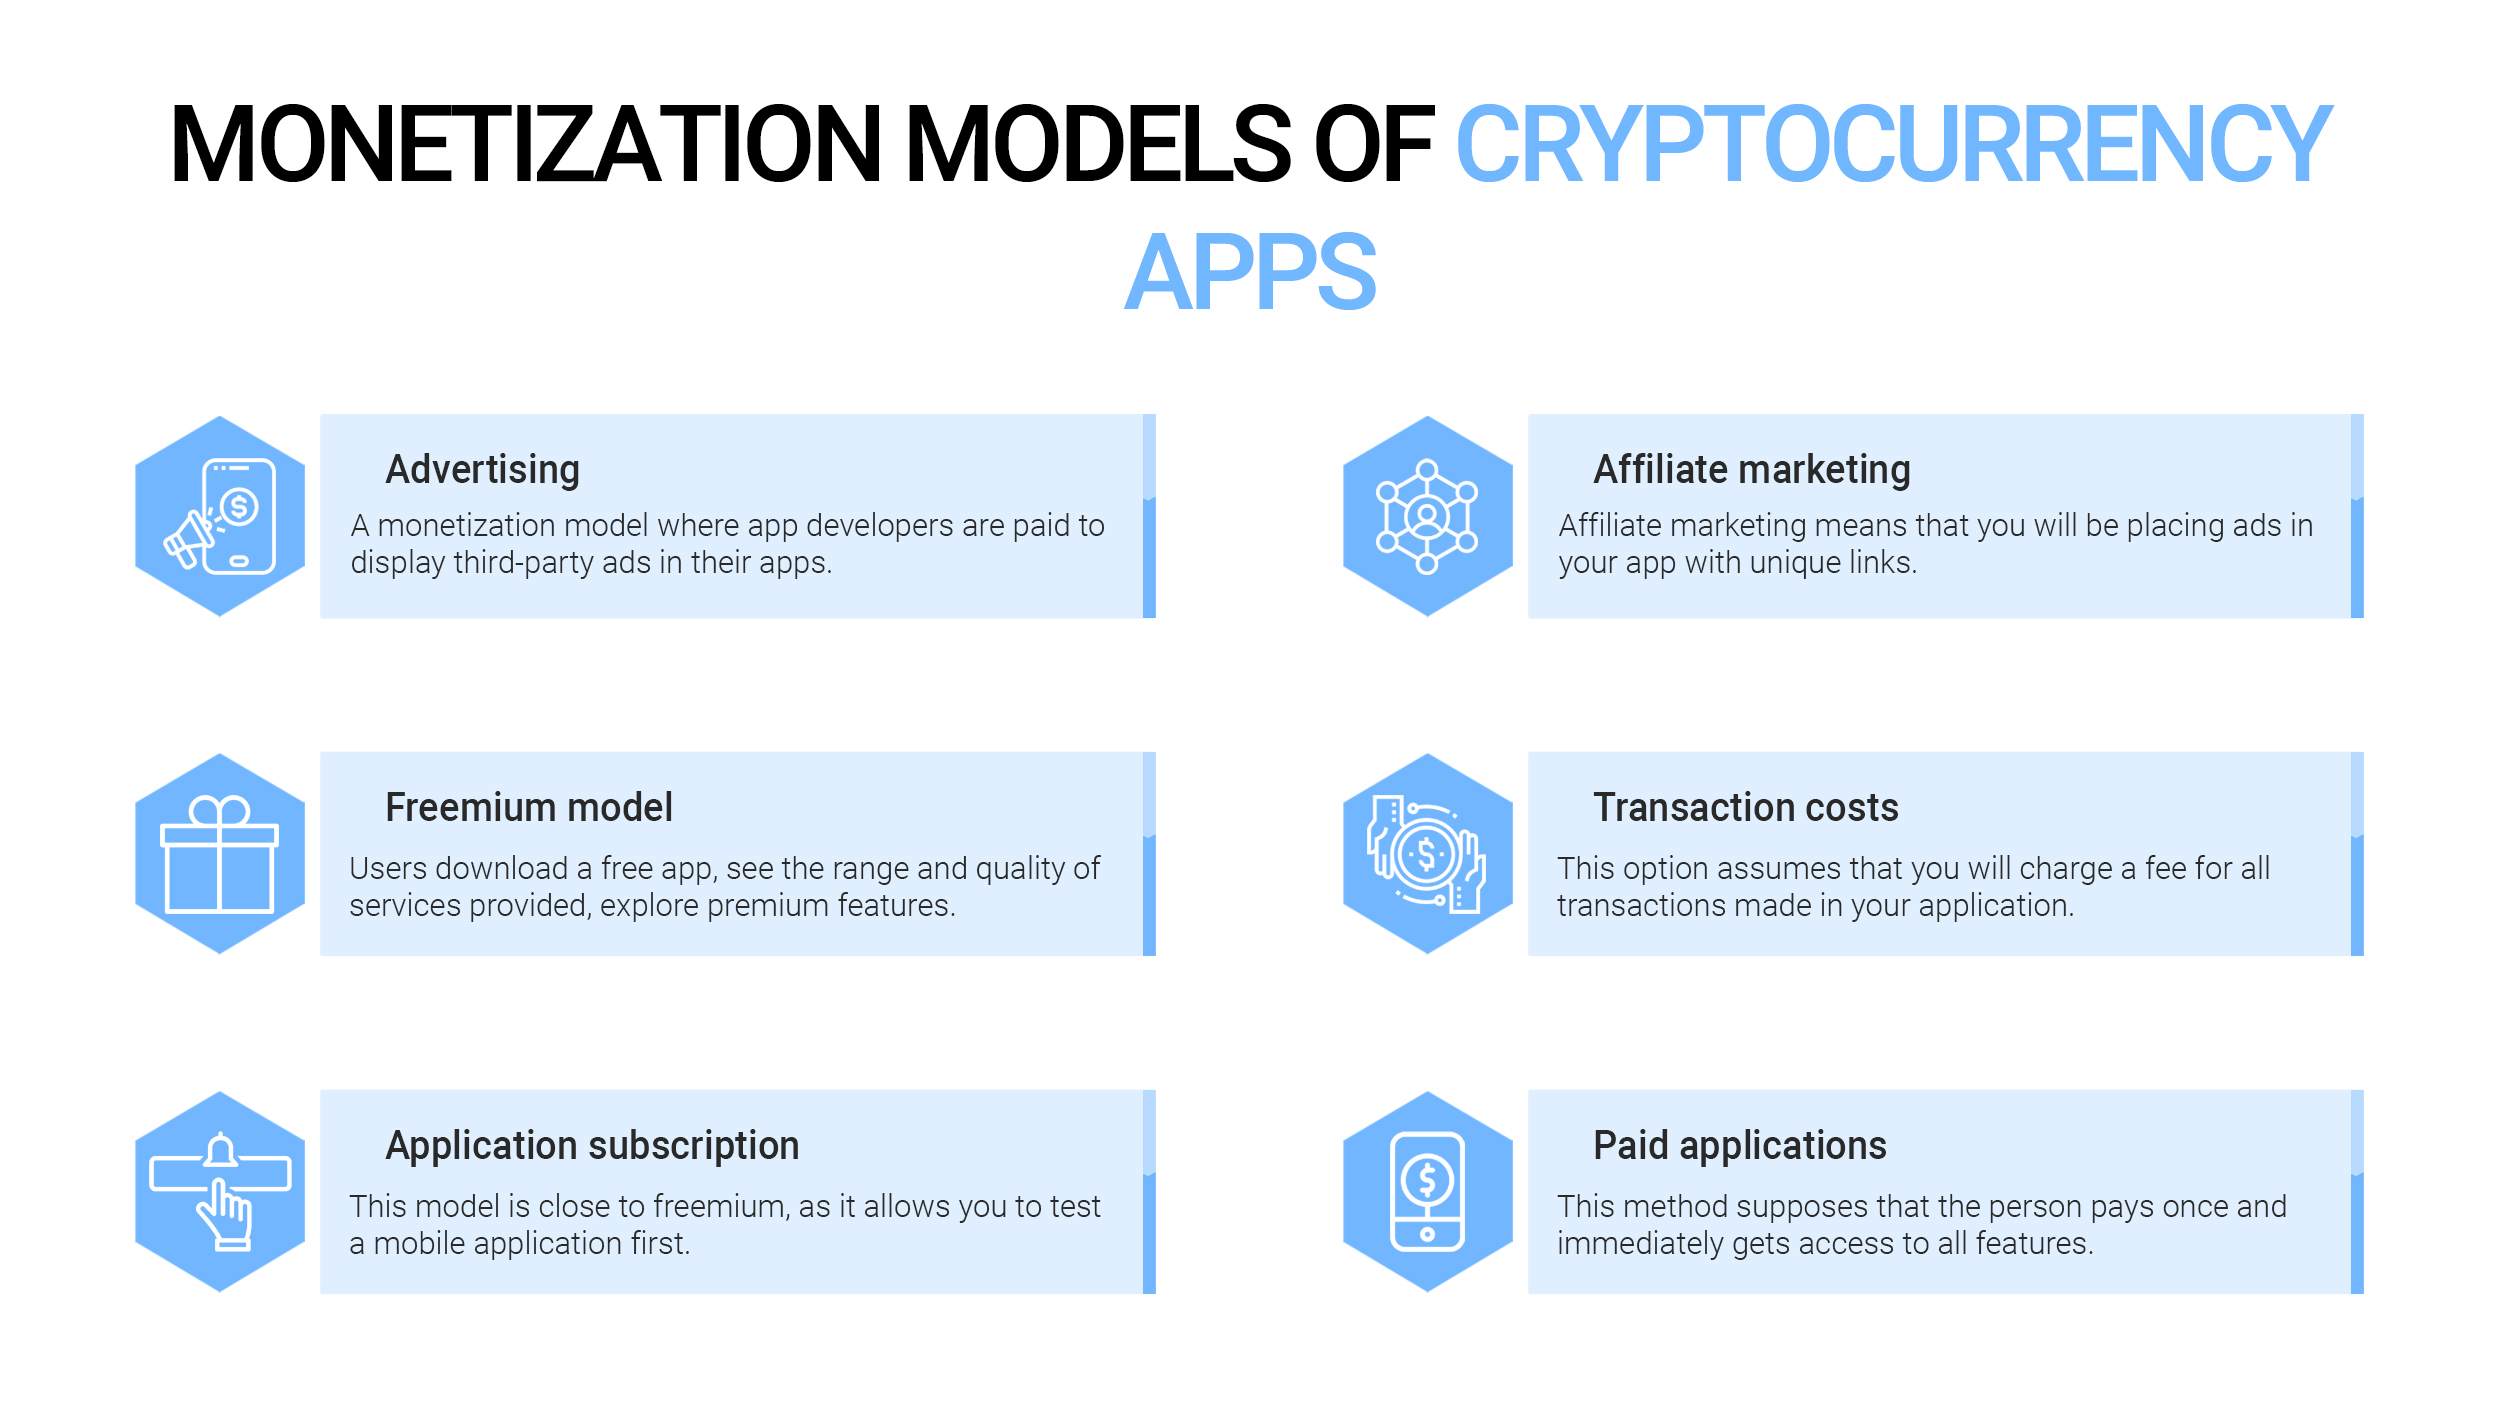 Monetization models of cryptocurrency apps